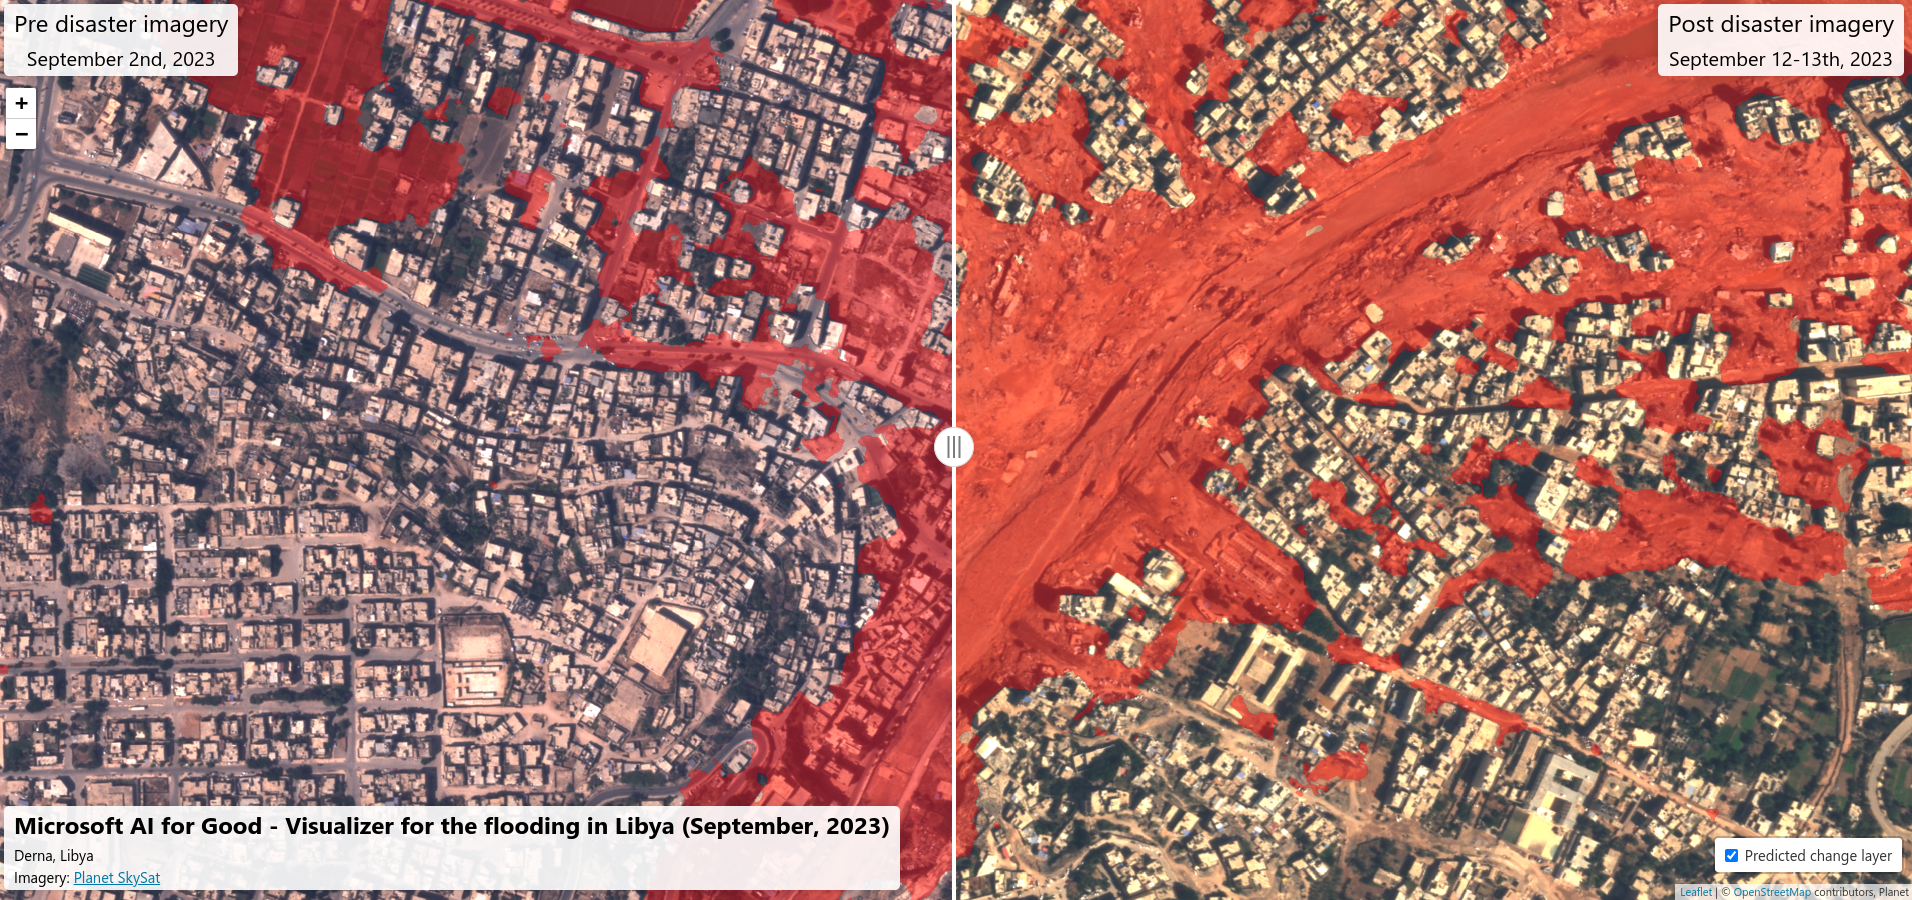 Before and after the floods in Libya